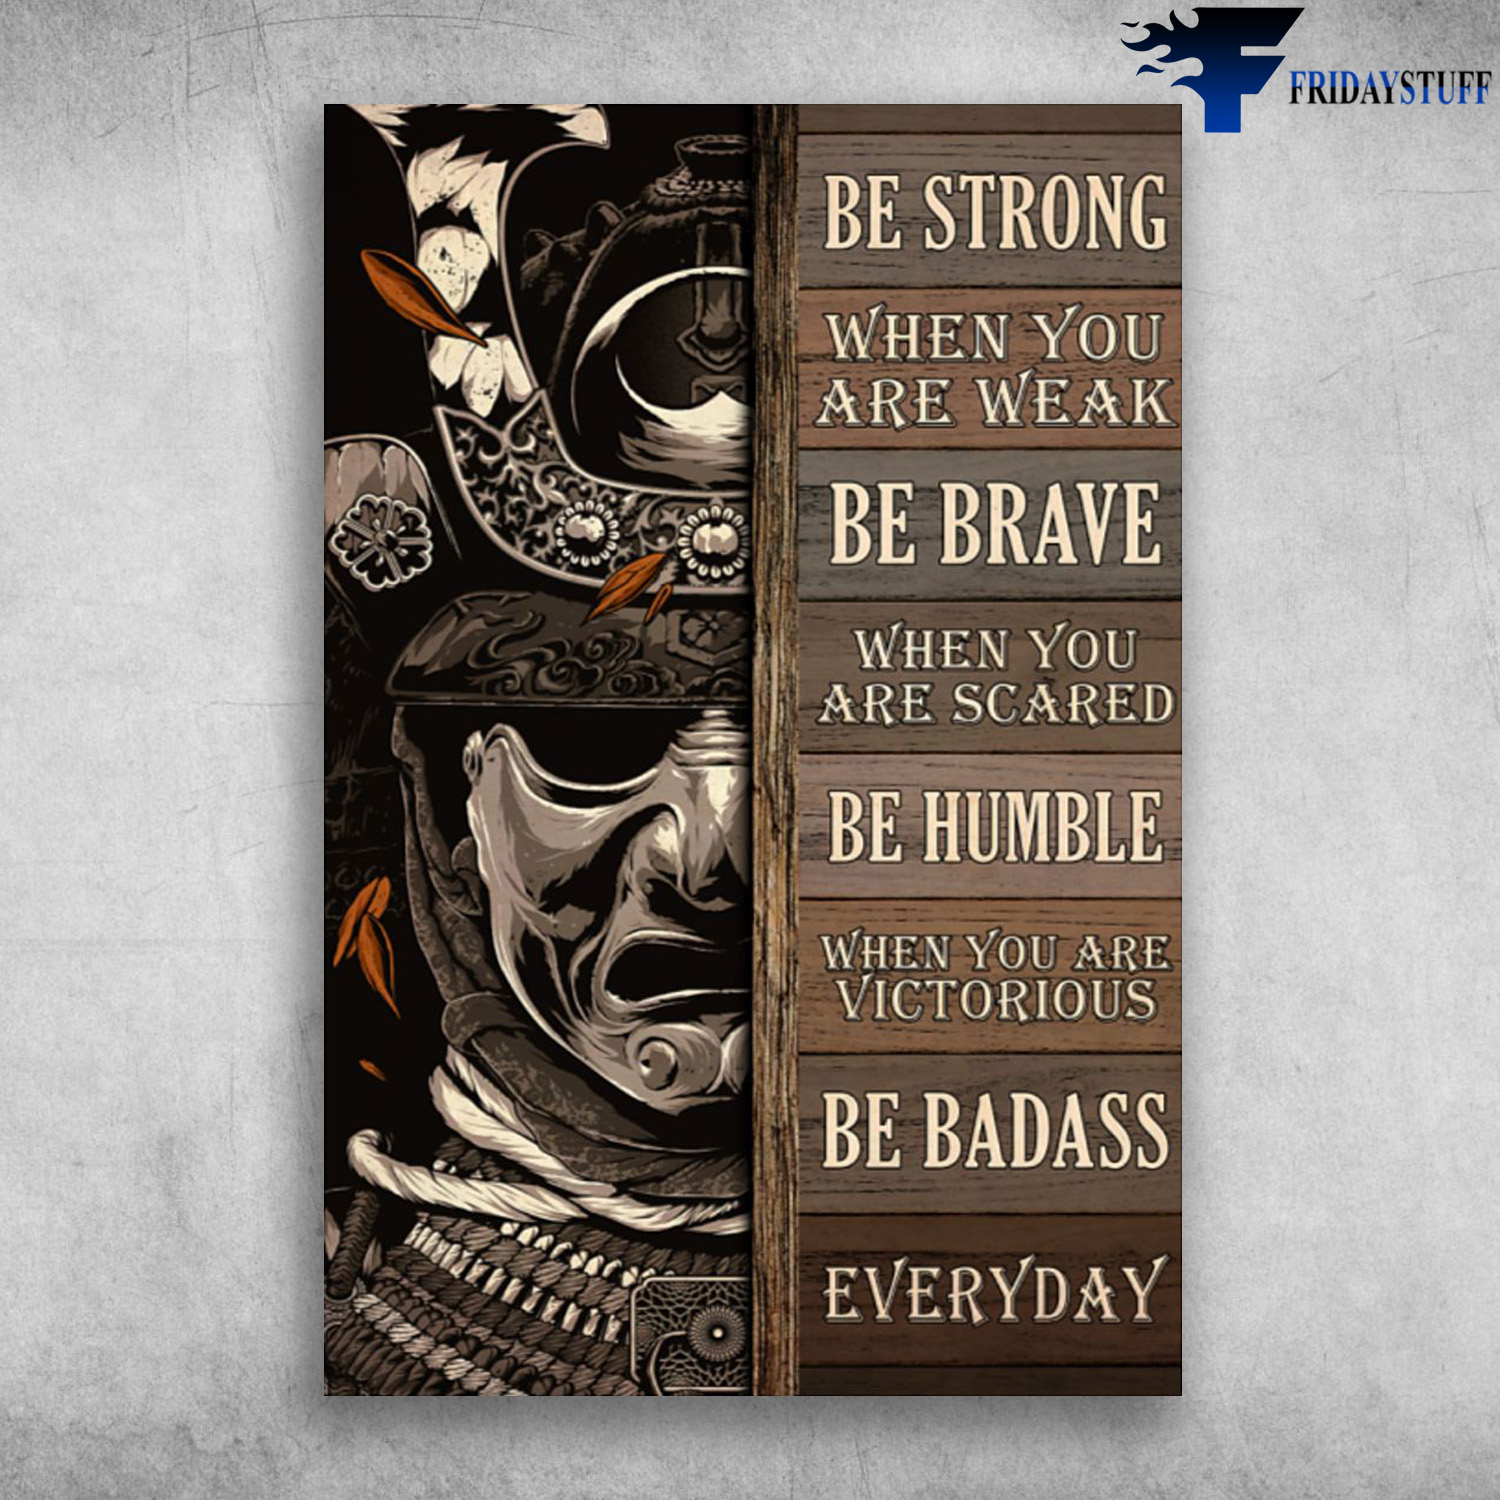 The Samurai - Be Strong When You Are Weak, Be Brave When You Are Scared, Be Humble When You Are Victorious, Be Badass Everyday